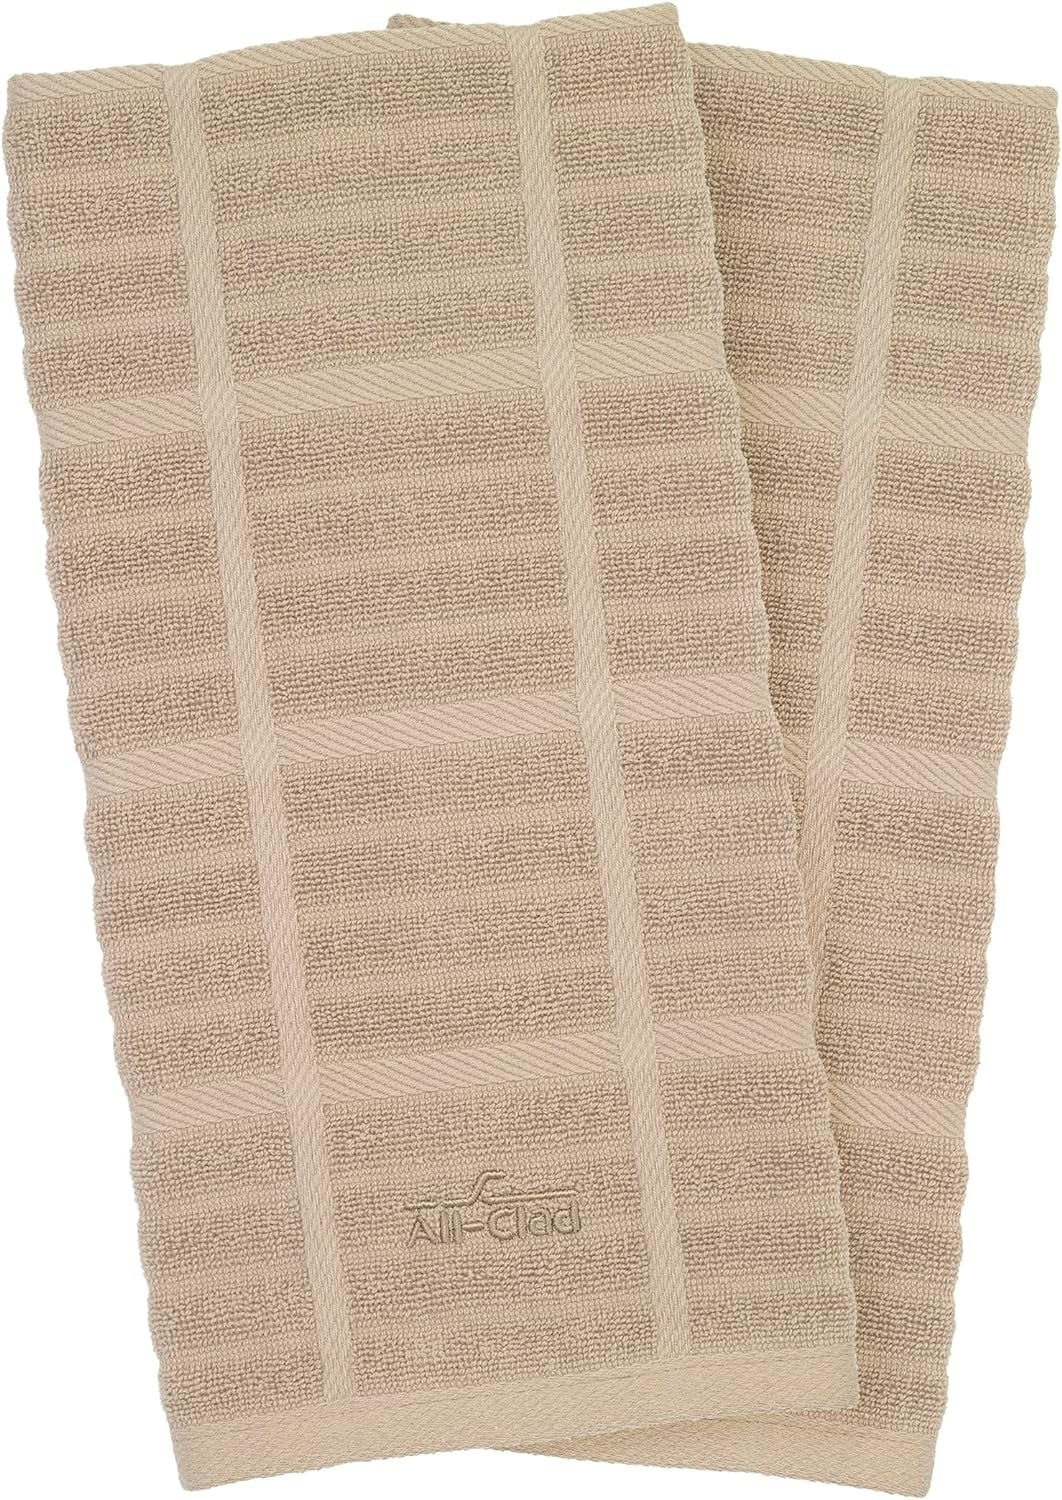 All-Clad Textiles Kitchen Towel, Solid-2 Pack, Cappuccino, 2 Count